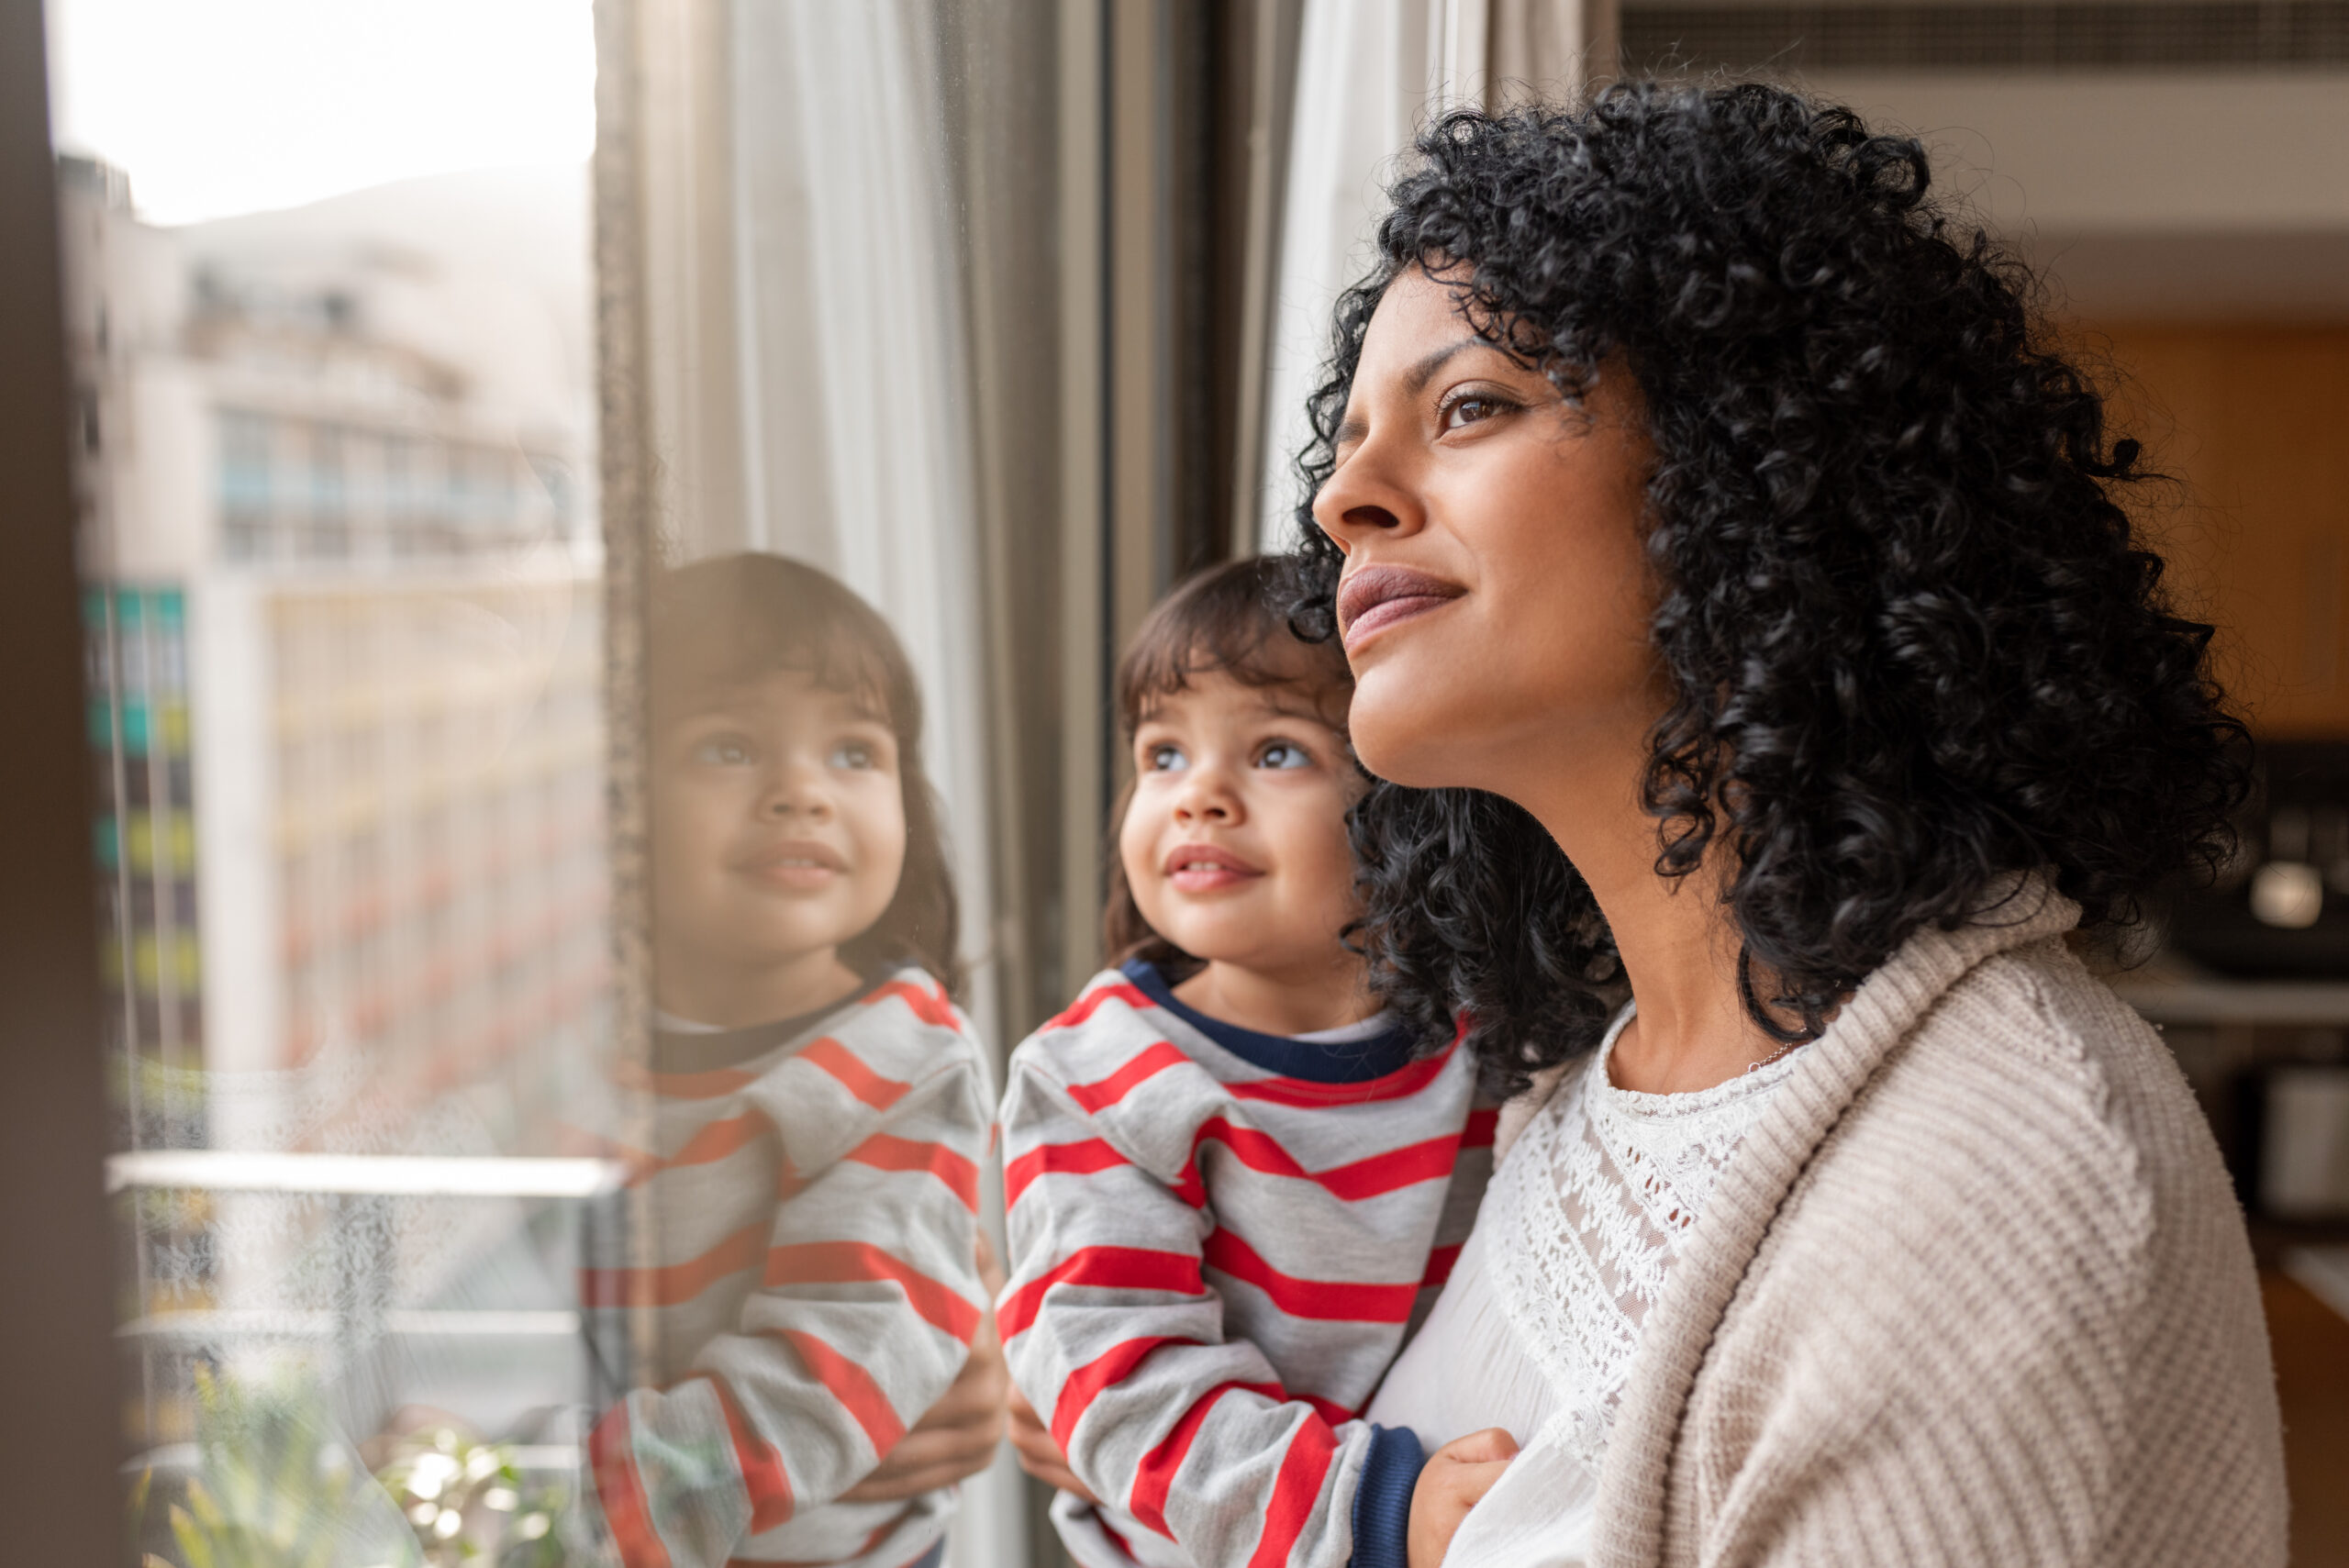 Woman with dark hair looking out the window holding a child, both smiling.